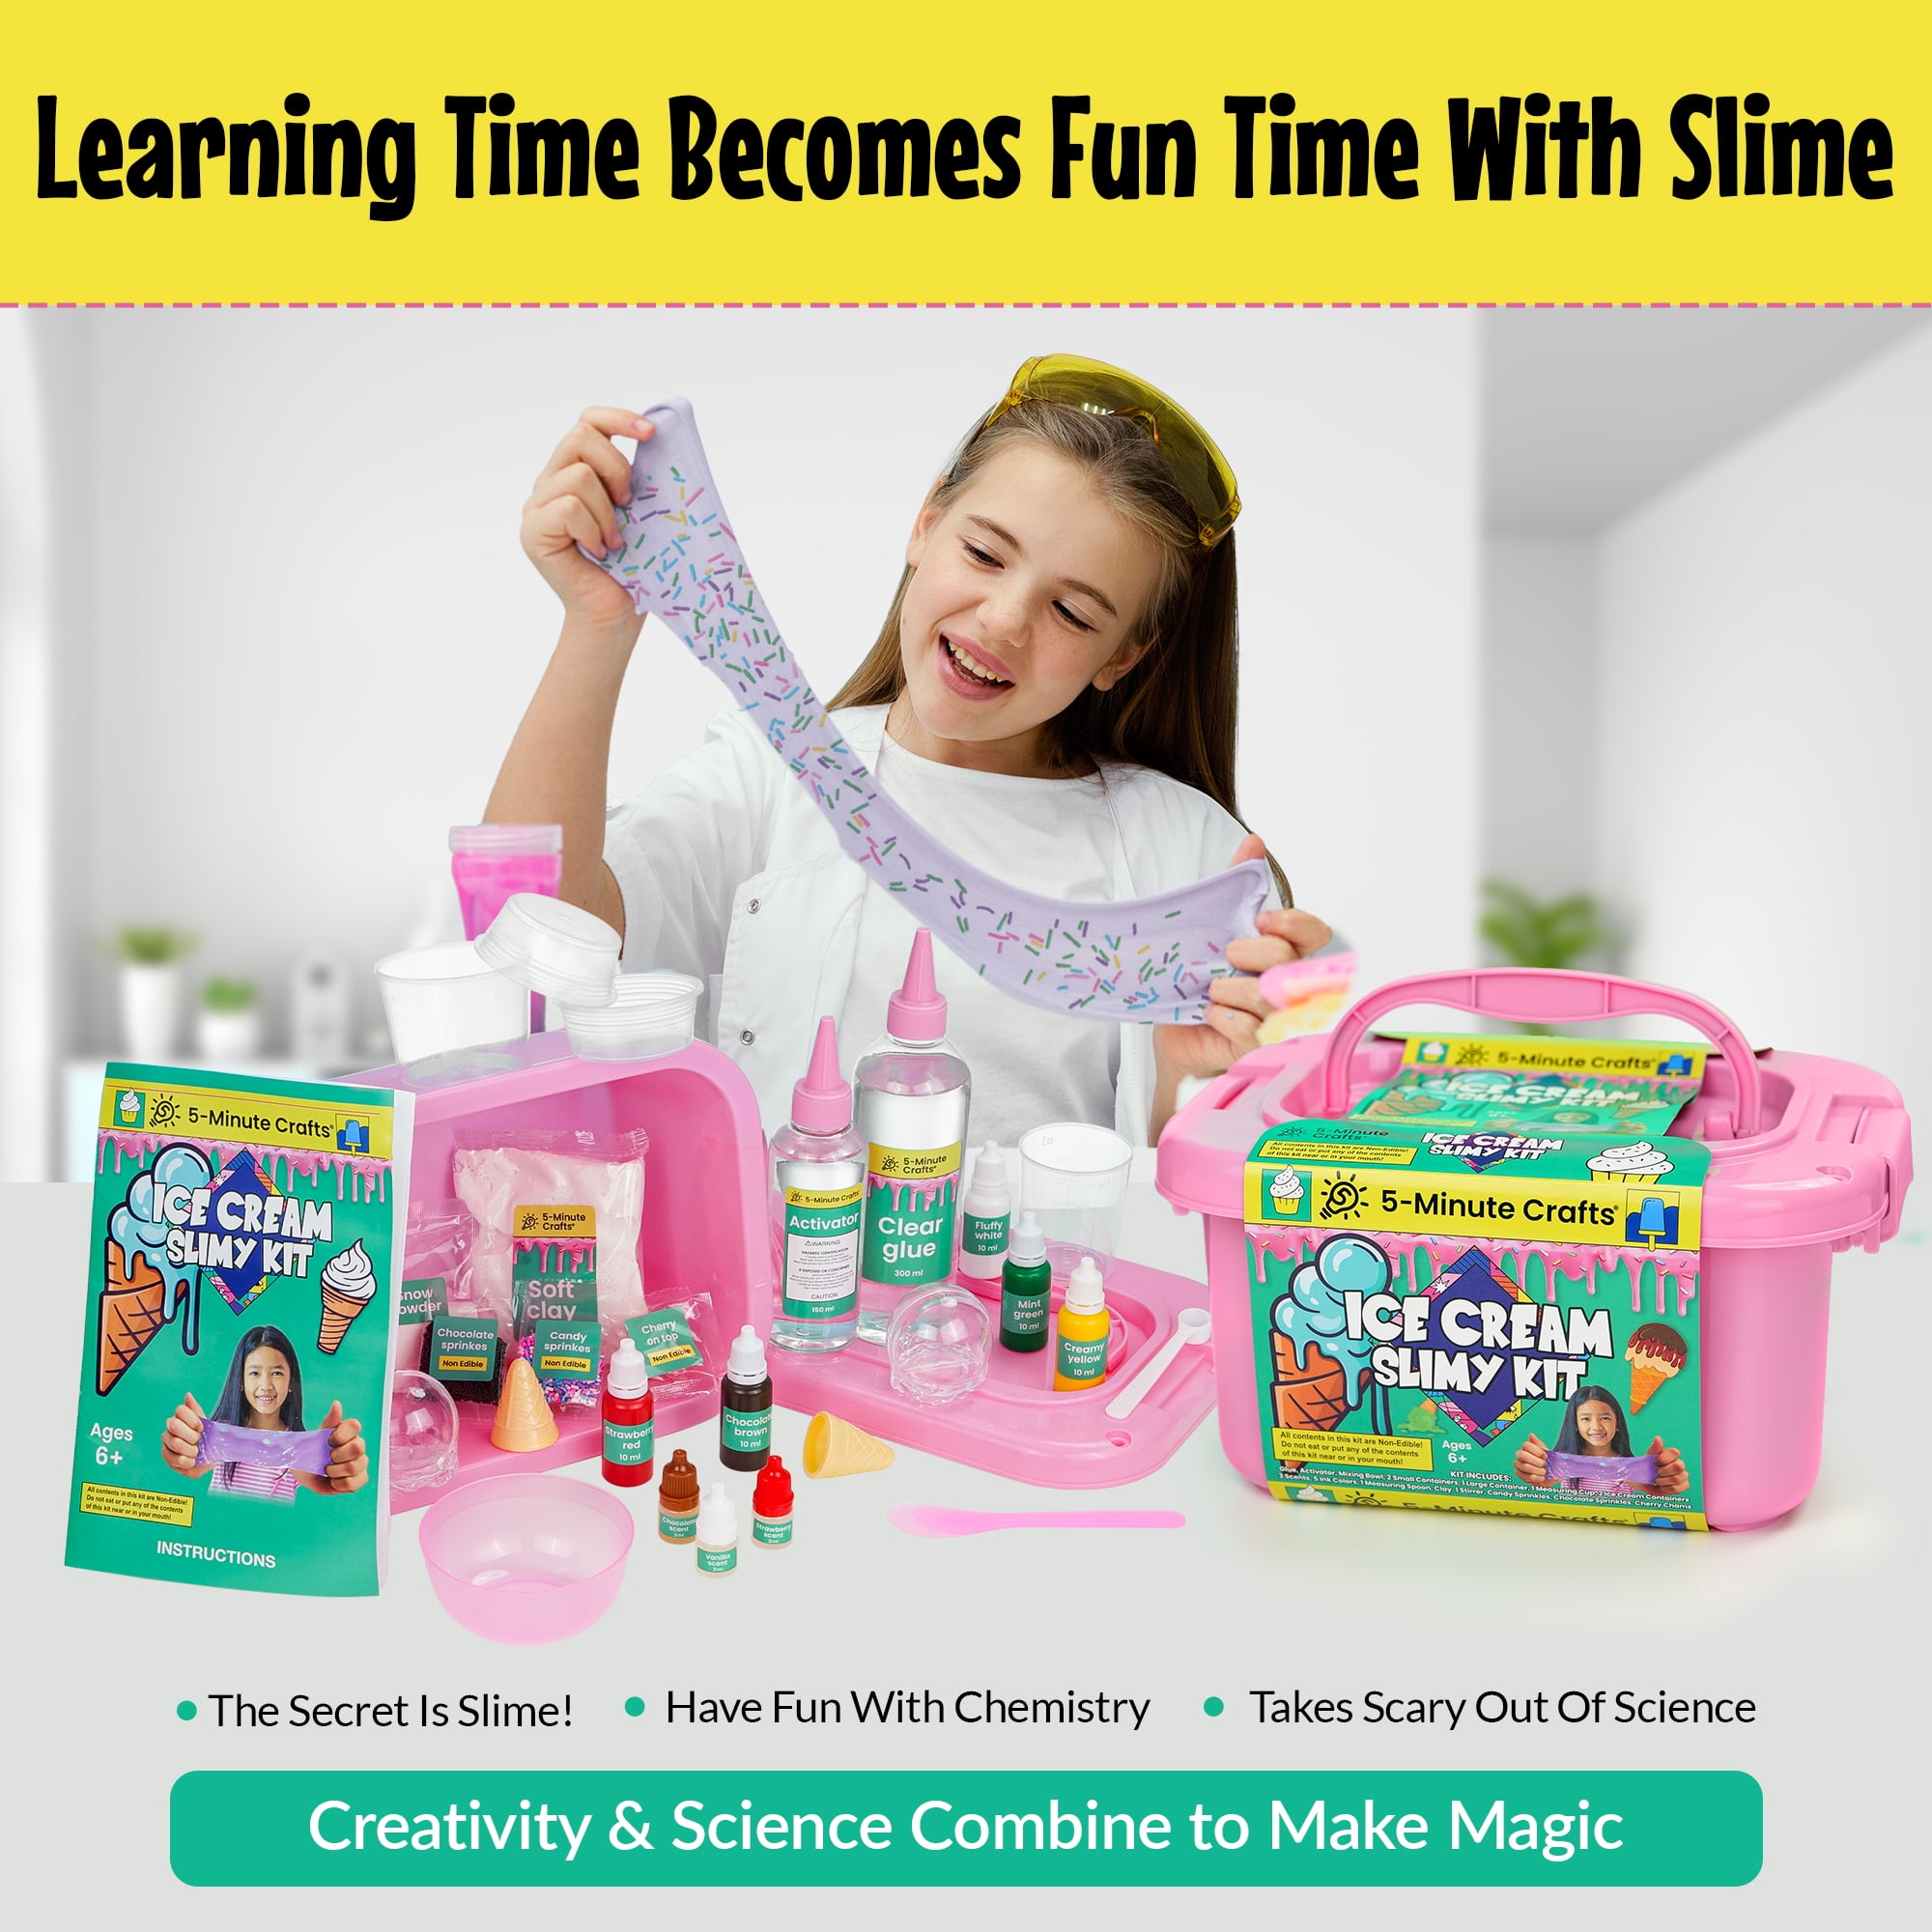 5-Minute Crafts - Slime Ice Cream Kit for Kids Ages 6+ As Seen on